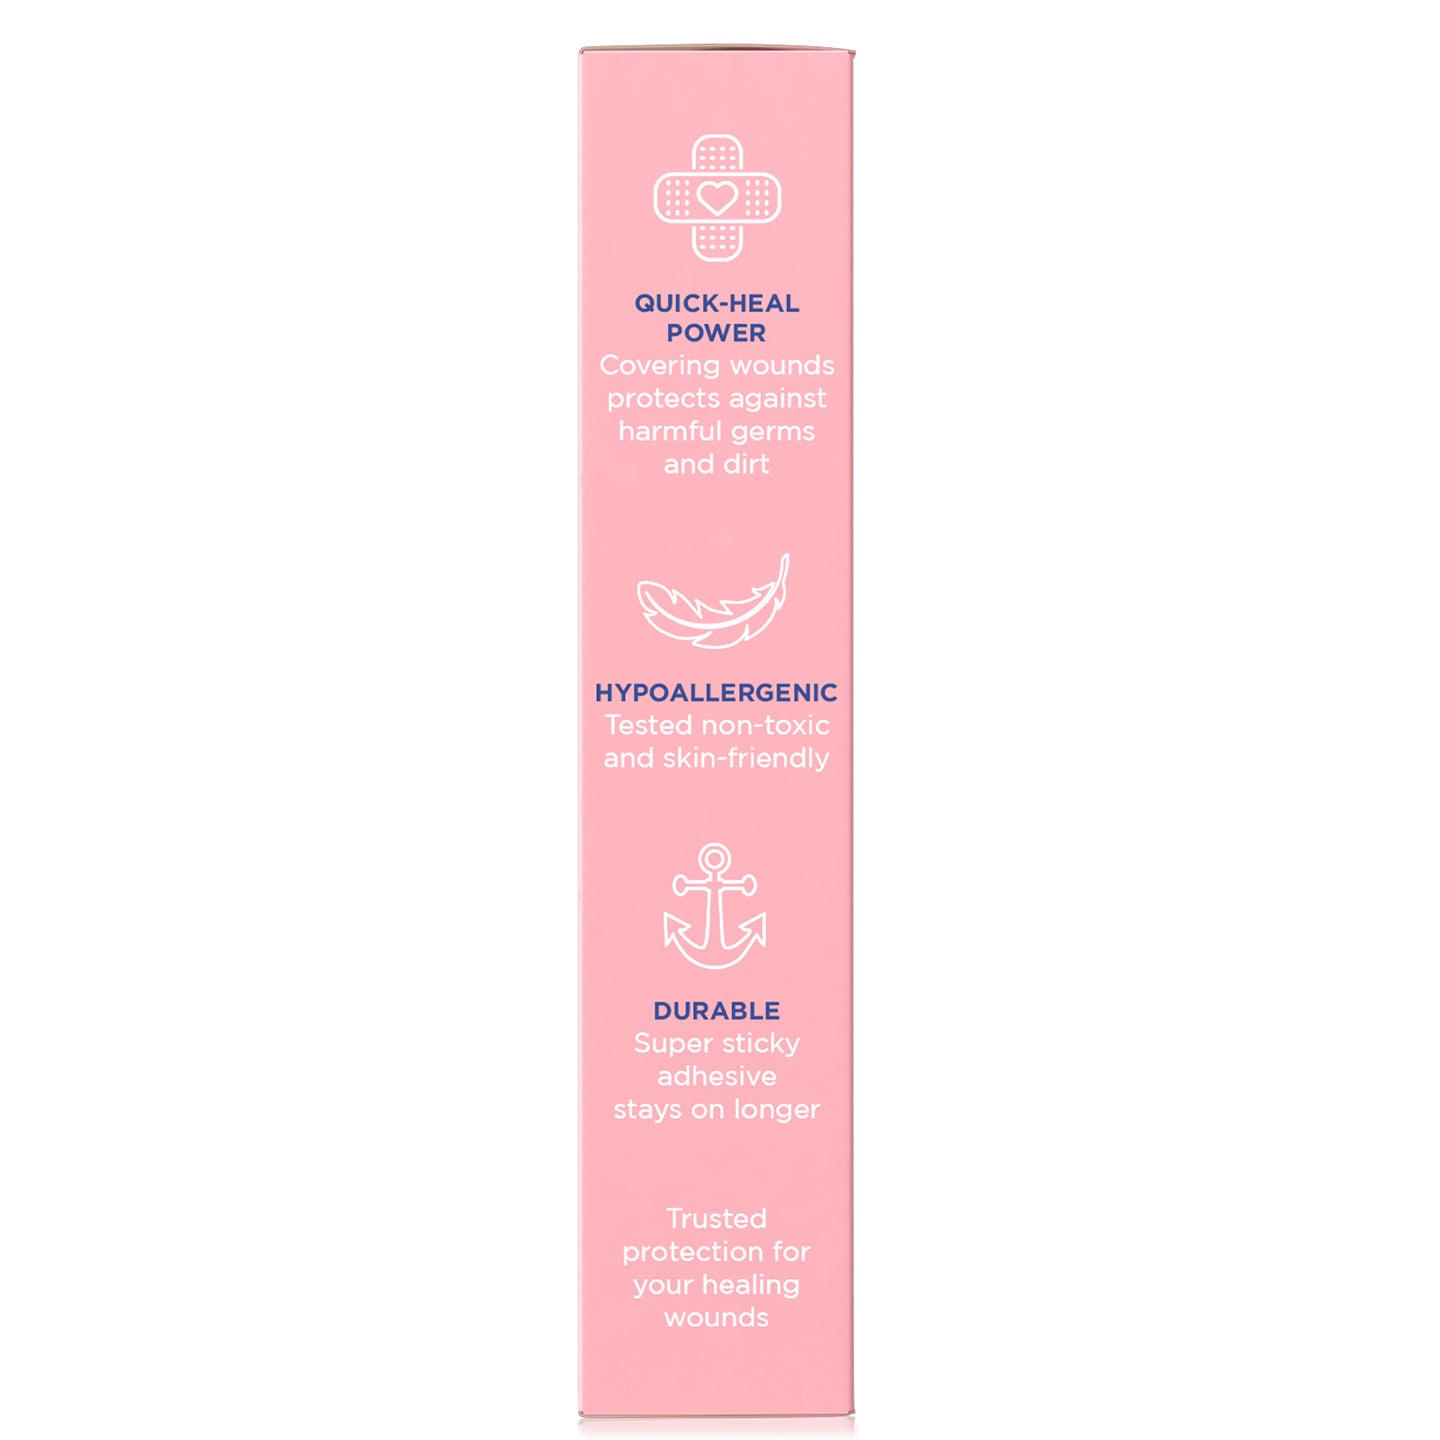 'Ouchie Printed Bandages'  20-Pack (Pink)